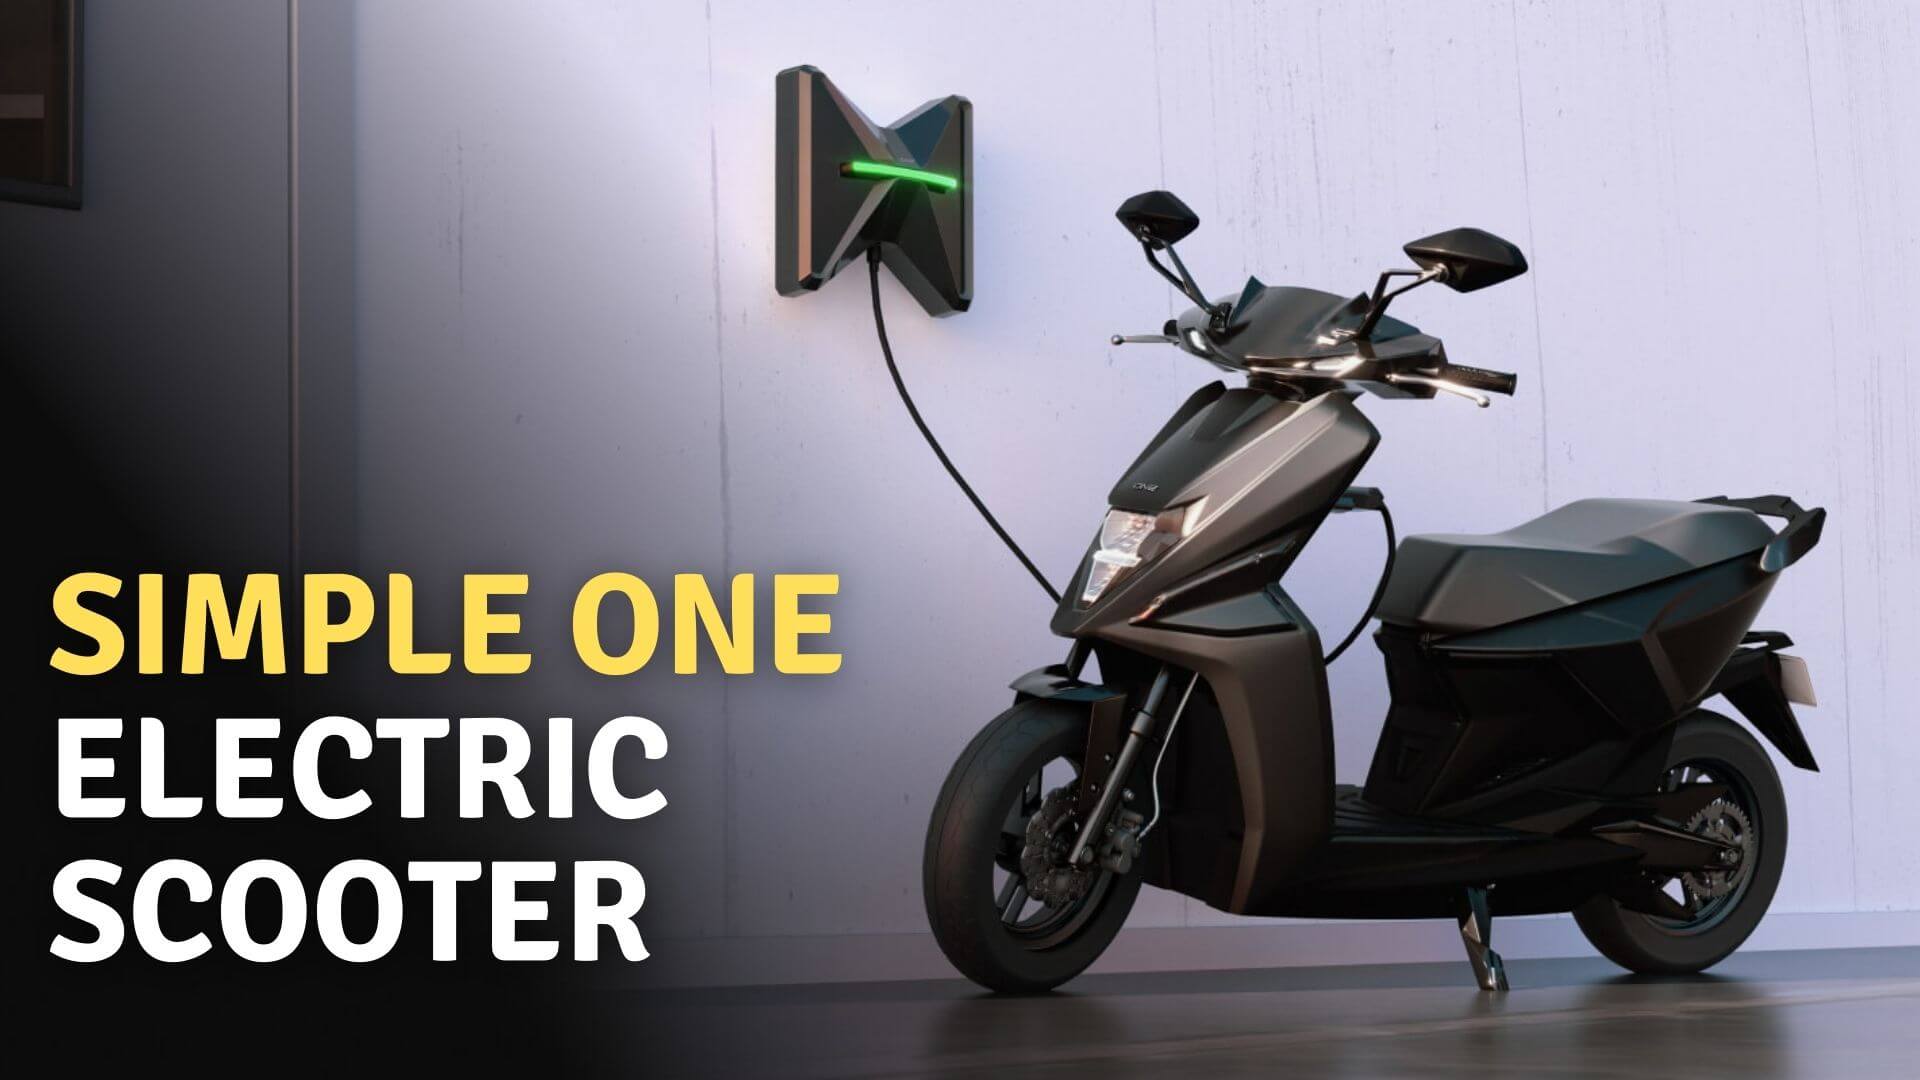 https://e-vehicleinfo.com/simple-one-electric-scooter-launch-and-delivery-dates-revised-again-may-price-hike/